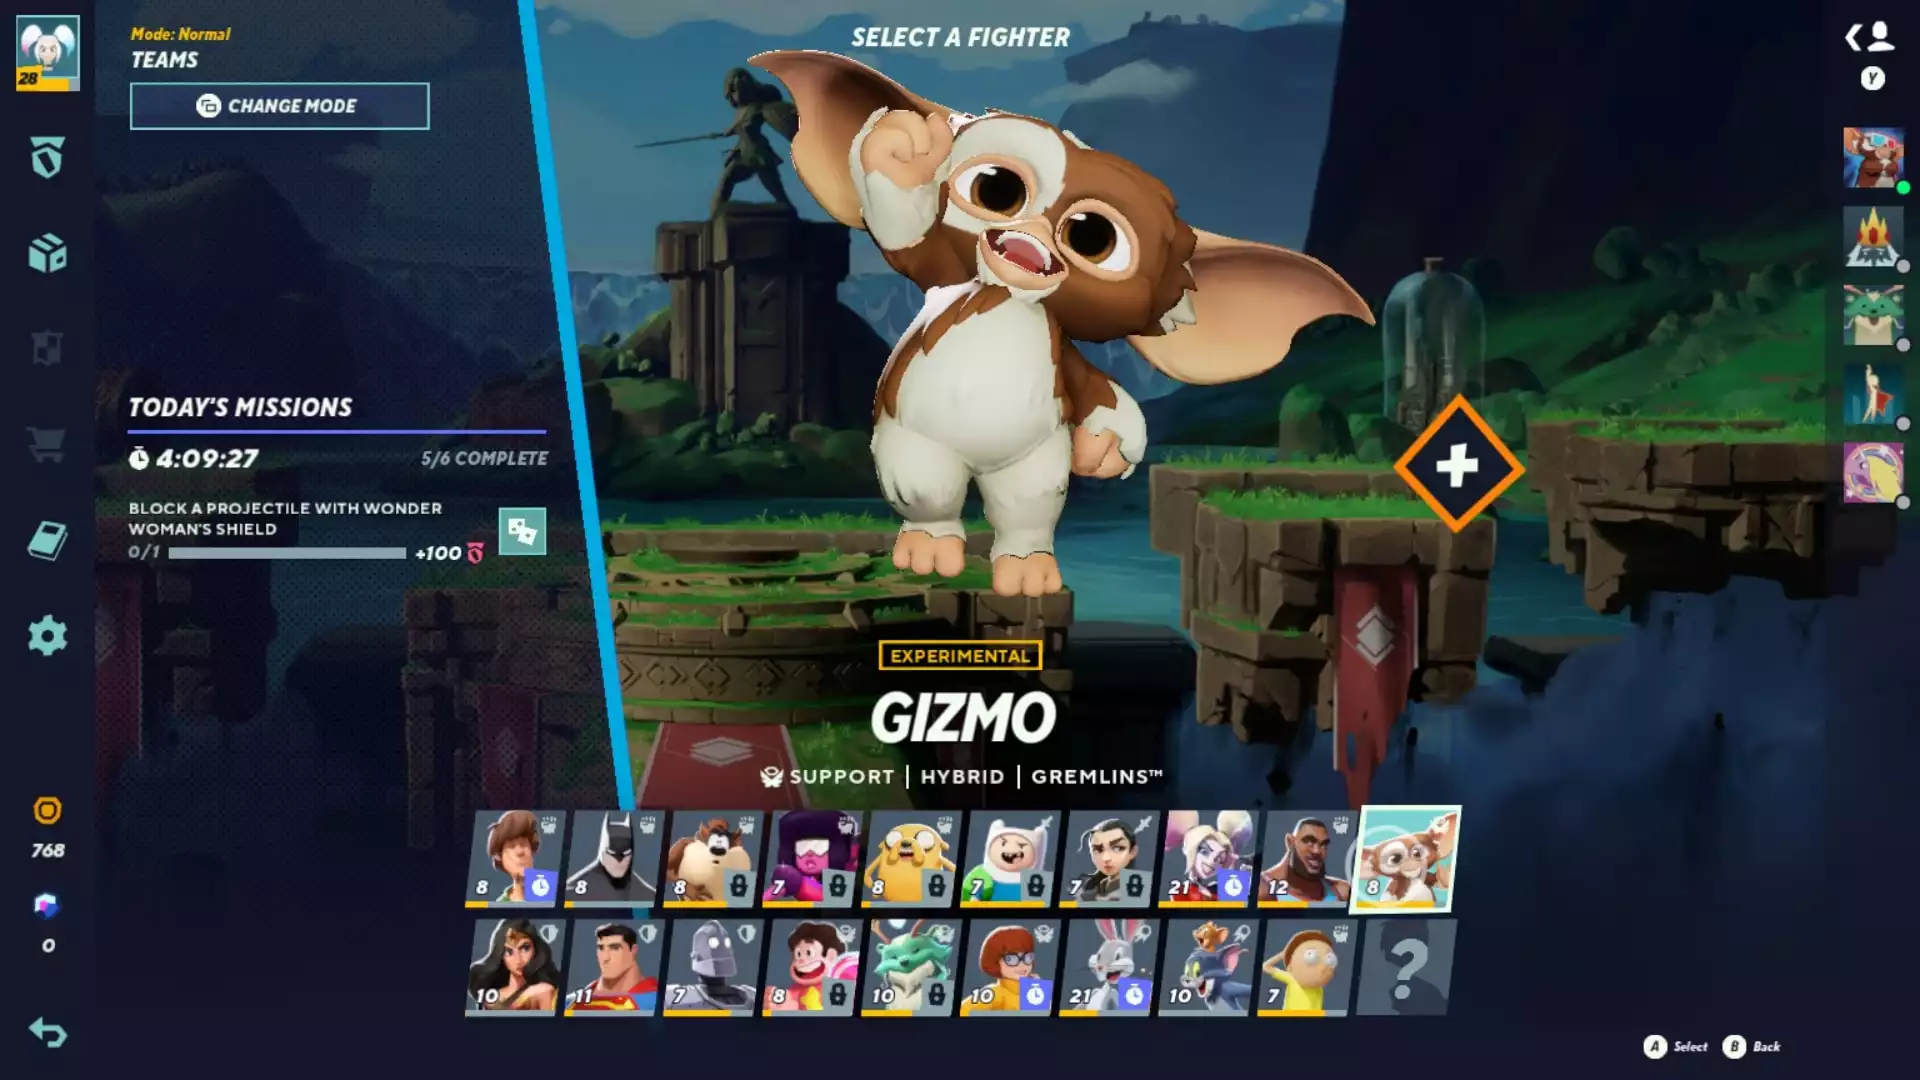 MultiVersus Gizmo Guide: Combos, Perks, Specials, And More